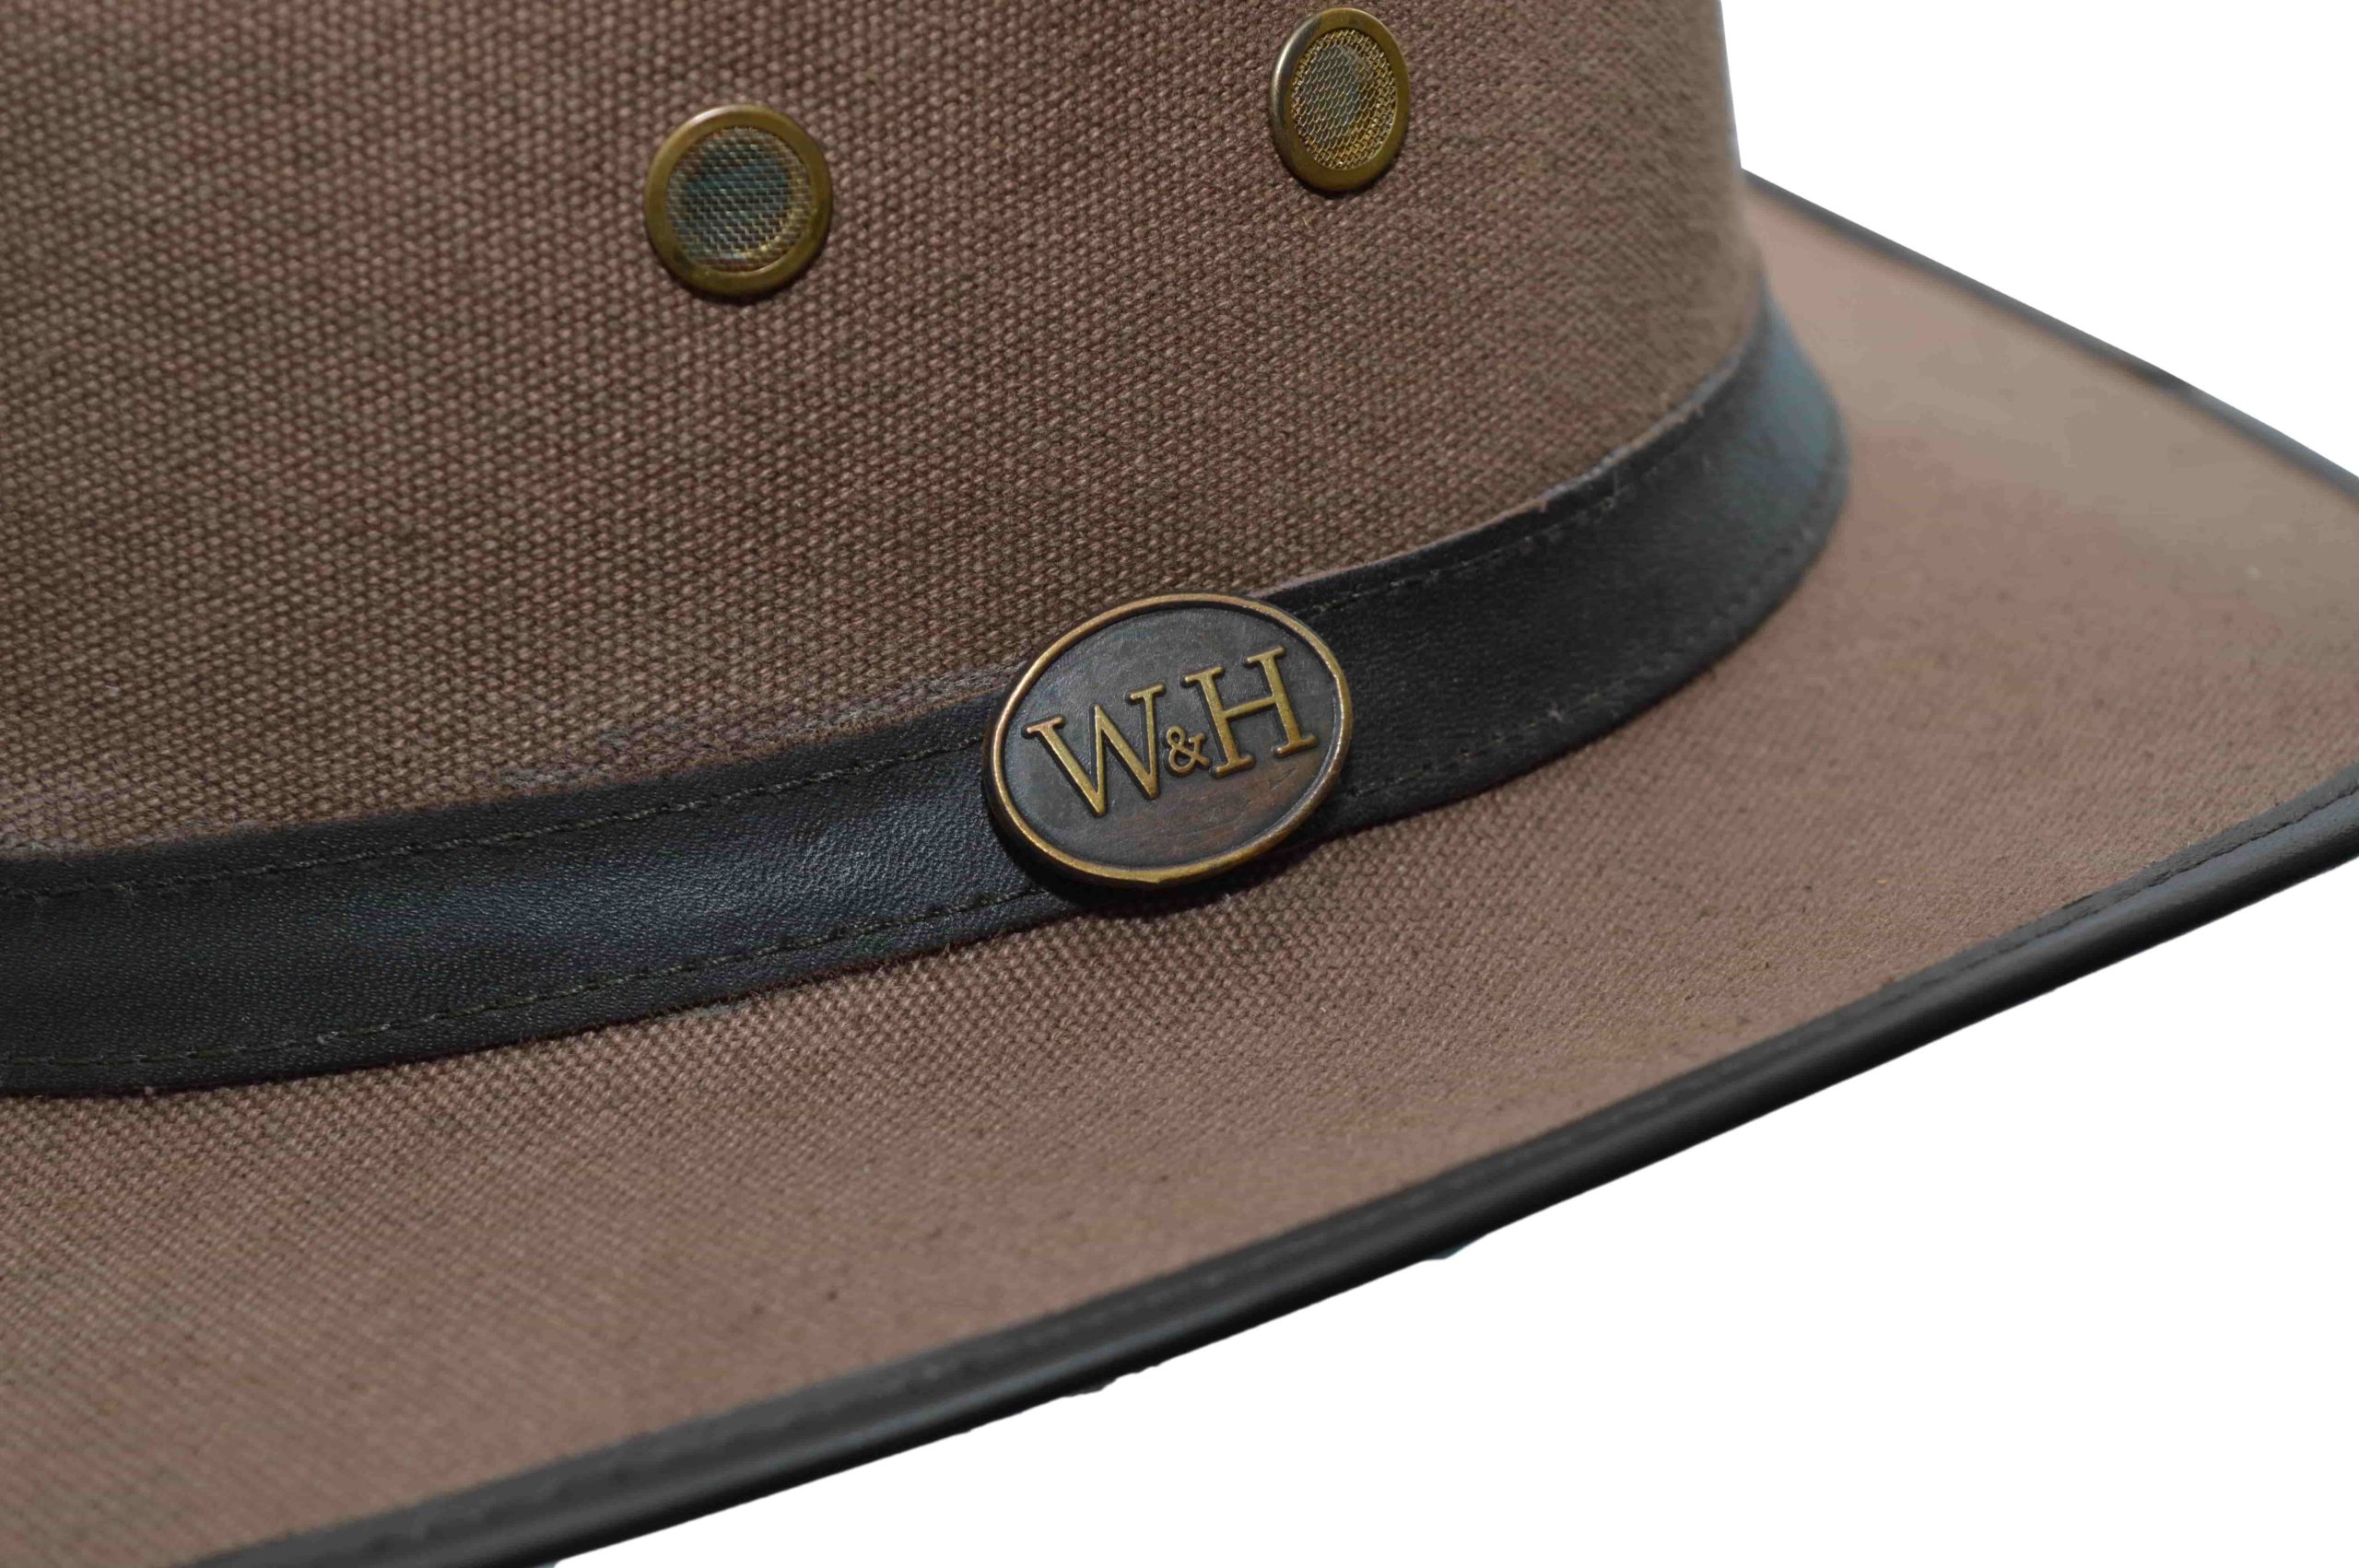 canvas outback stanley hat dark tan